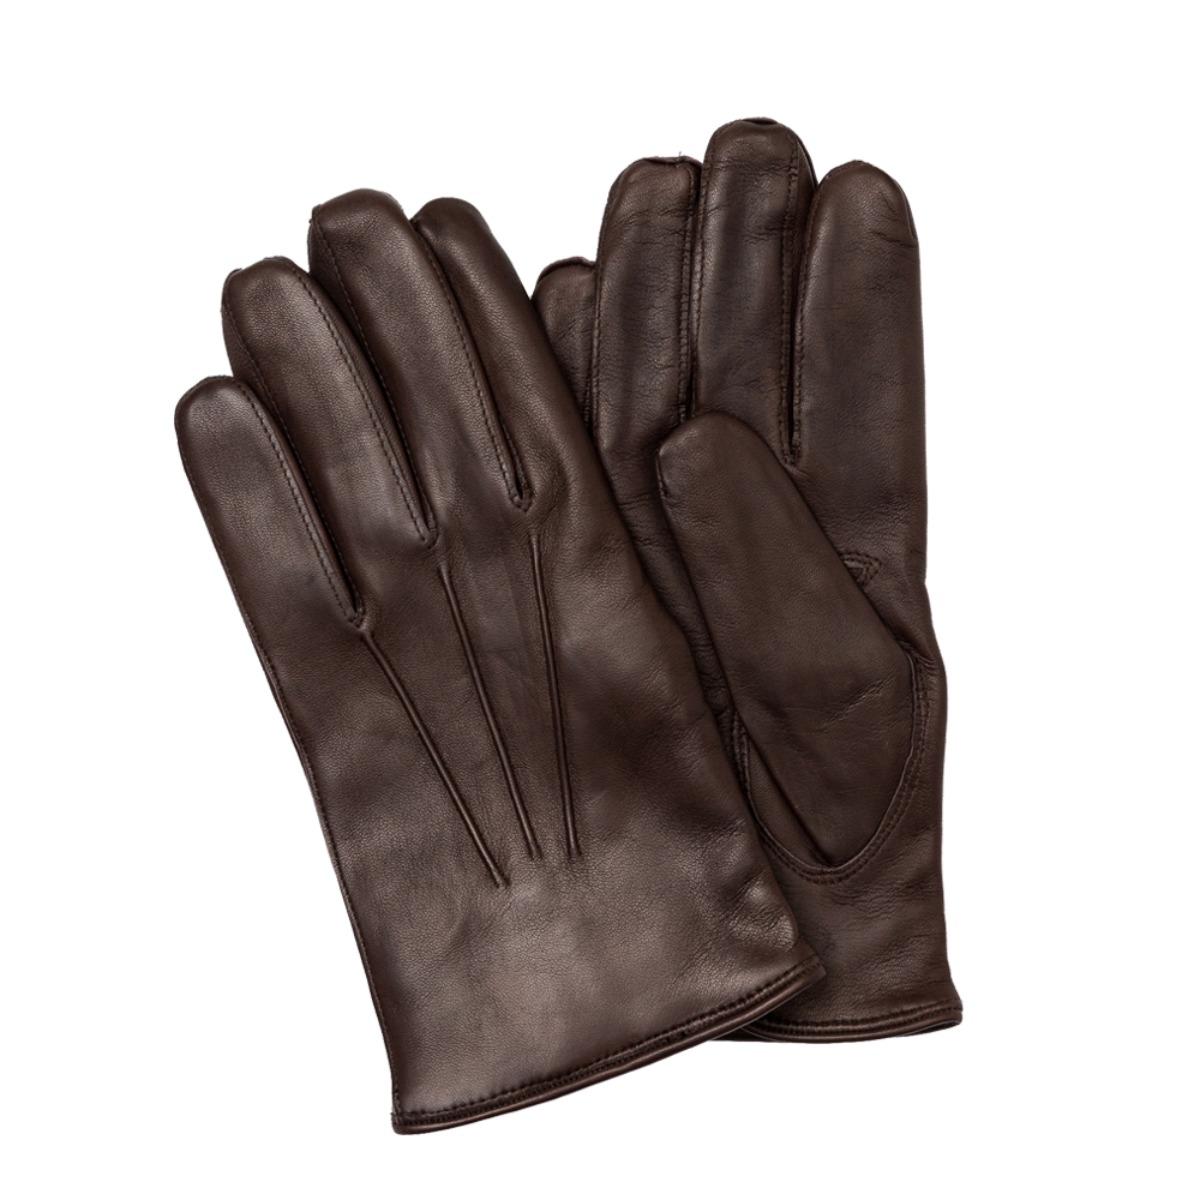 OMEGA GLOVES NAPPA LEATHER GLOVES BROWN